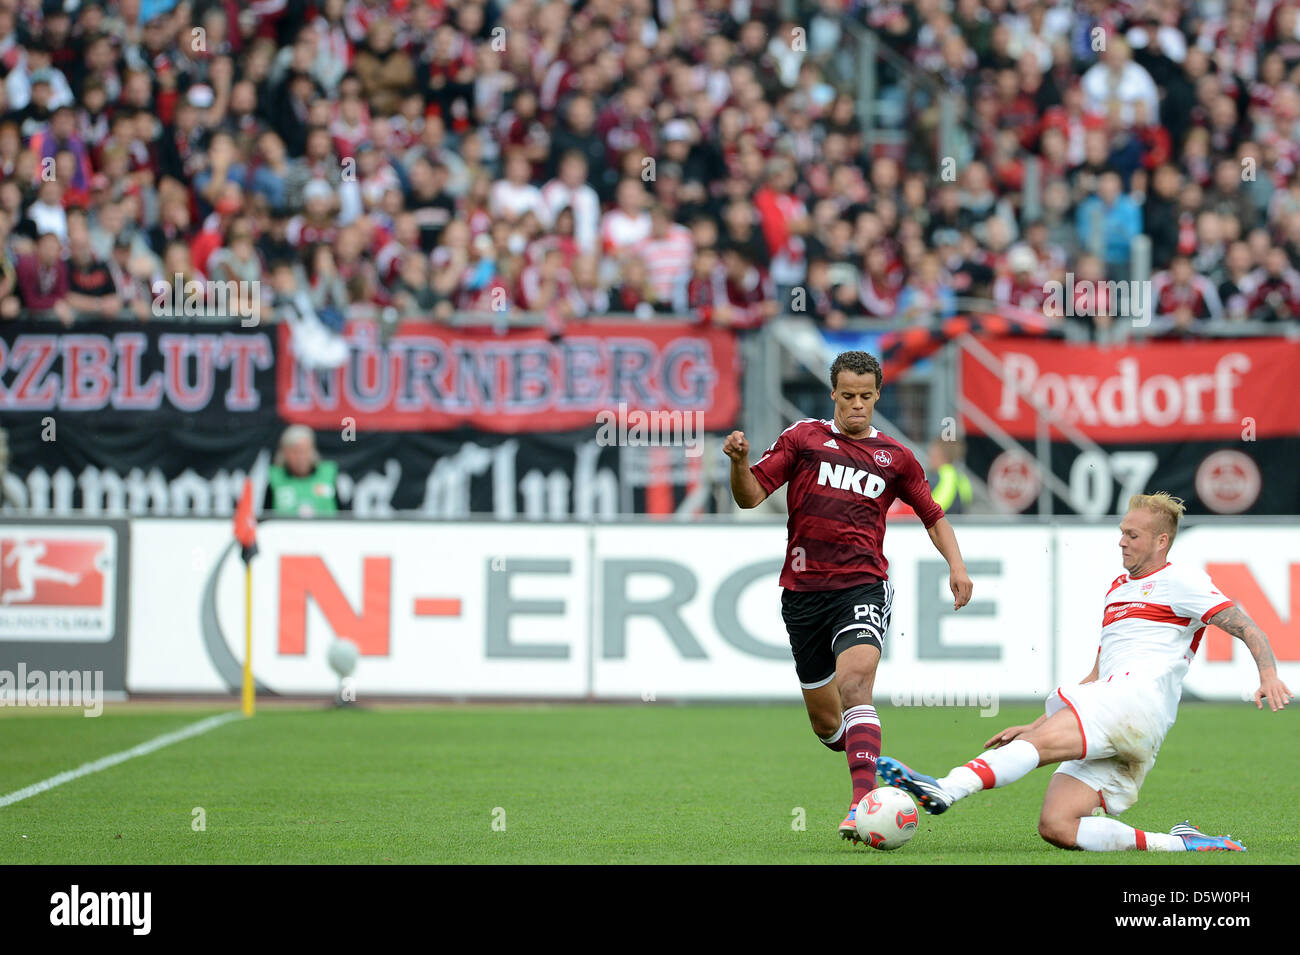 Stuttgart's Raphael Holzhauser (R) vies for the ball with Nuremberg's Timothy Chandler during the German Bundesliga match between FC Nuremberg and VfB Stuttgart at easyCredit Stadium in Nuremberg, Germany, 29 September 2012. The final score was 0-2. Photo: DAVID EBENER  (ATTENTION: EMBARGO CONDITIONS! The DFL permits the further utilisation of up to 15 pictures only (no sequntial p Stock Photo